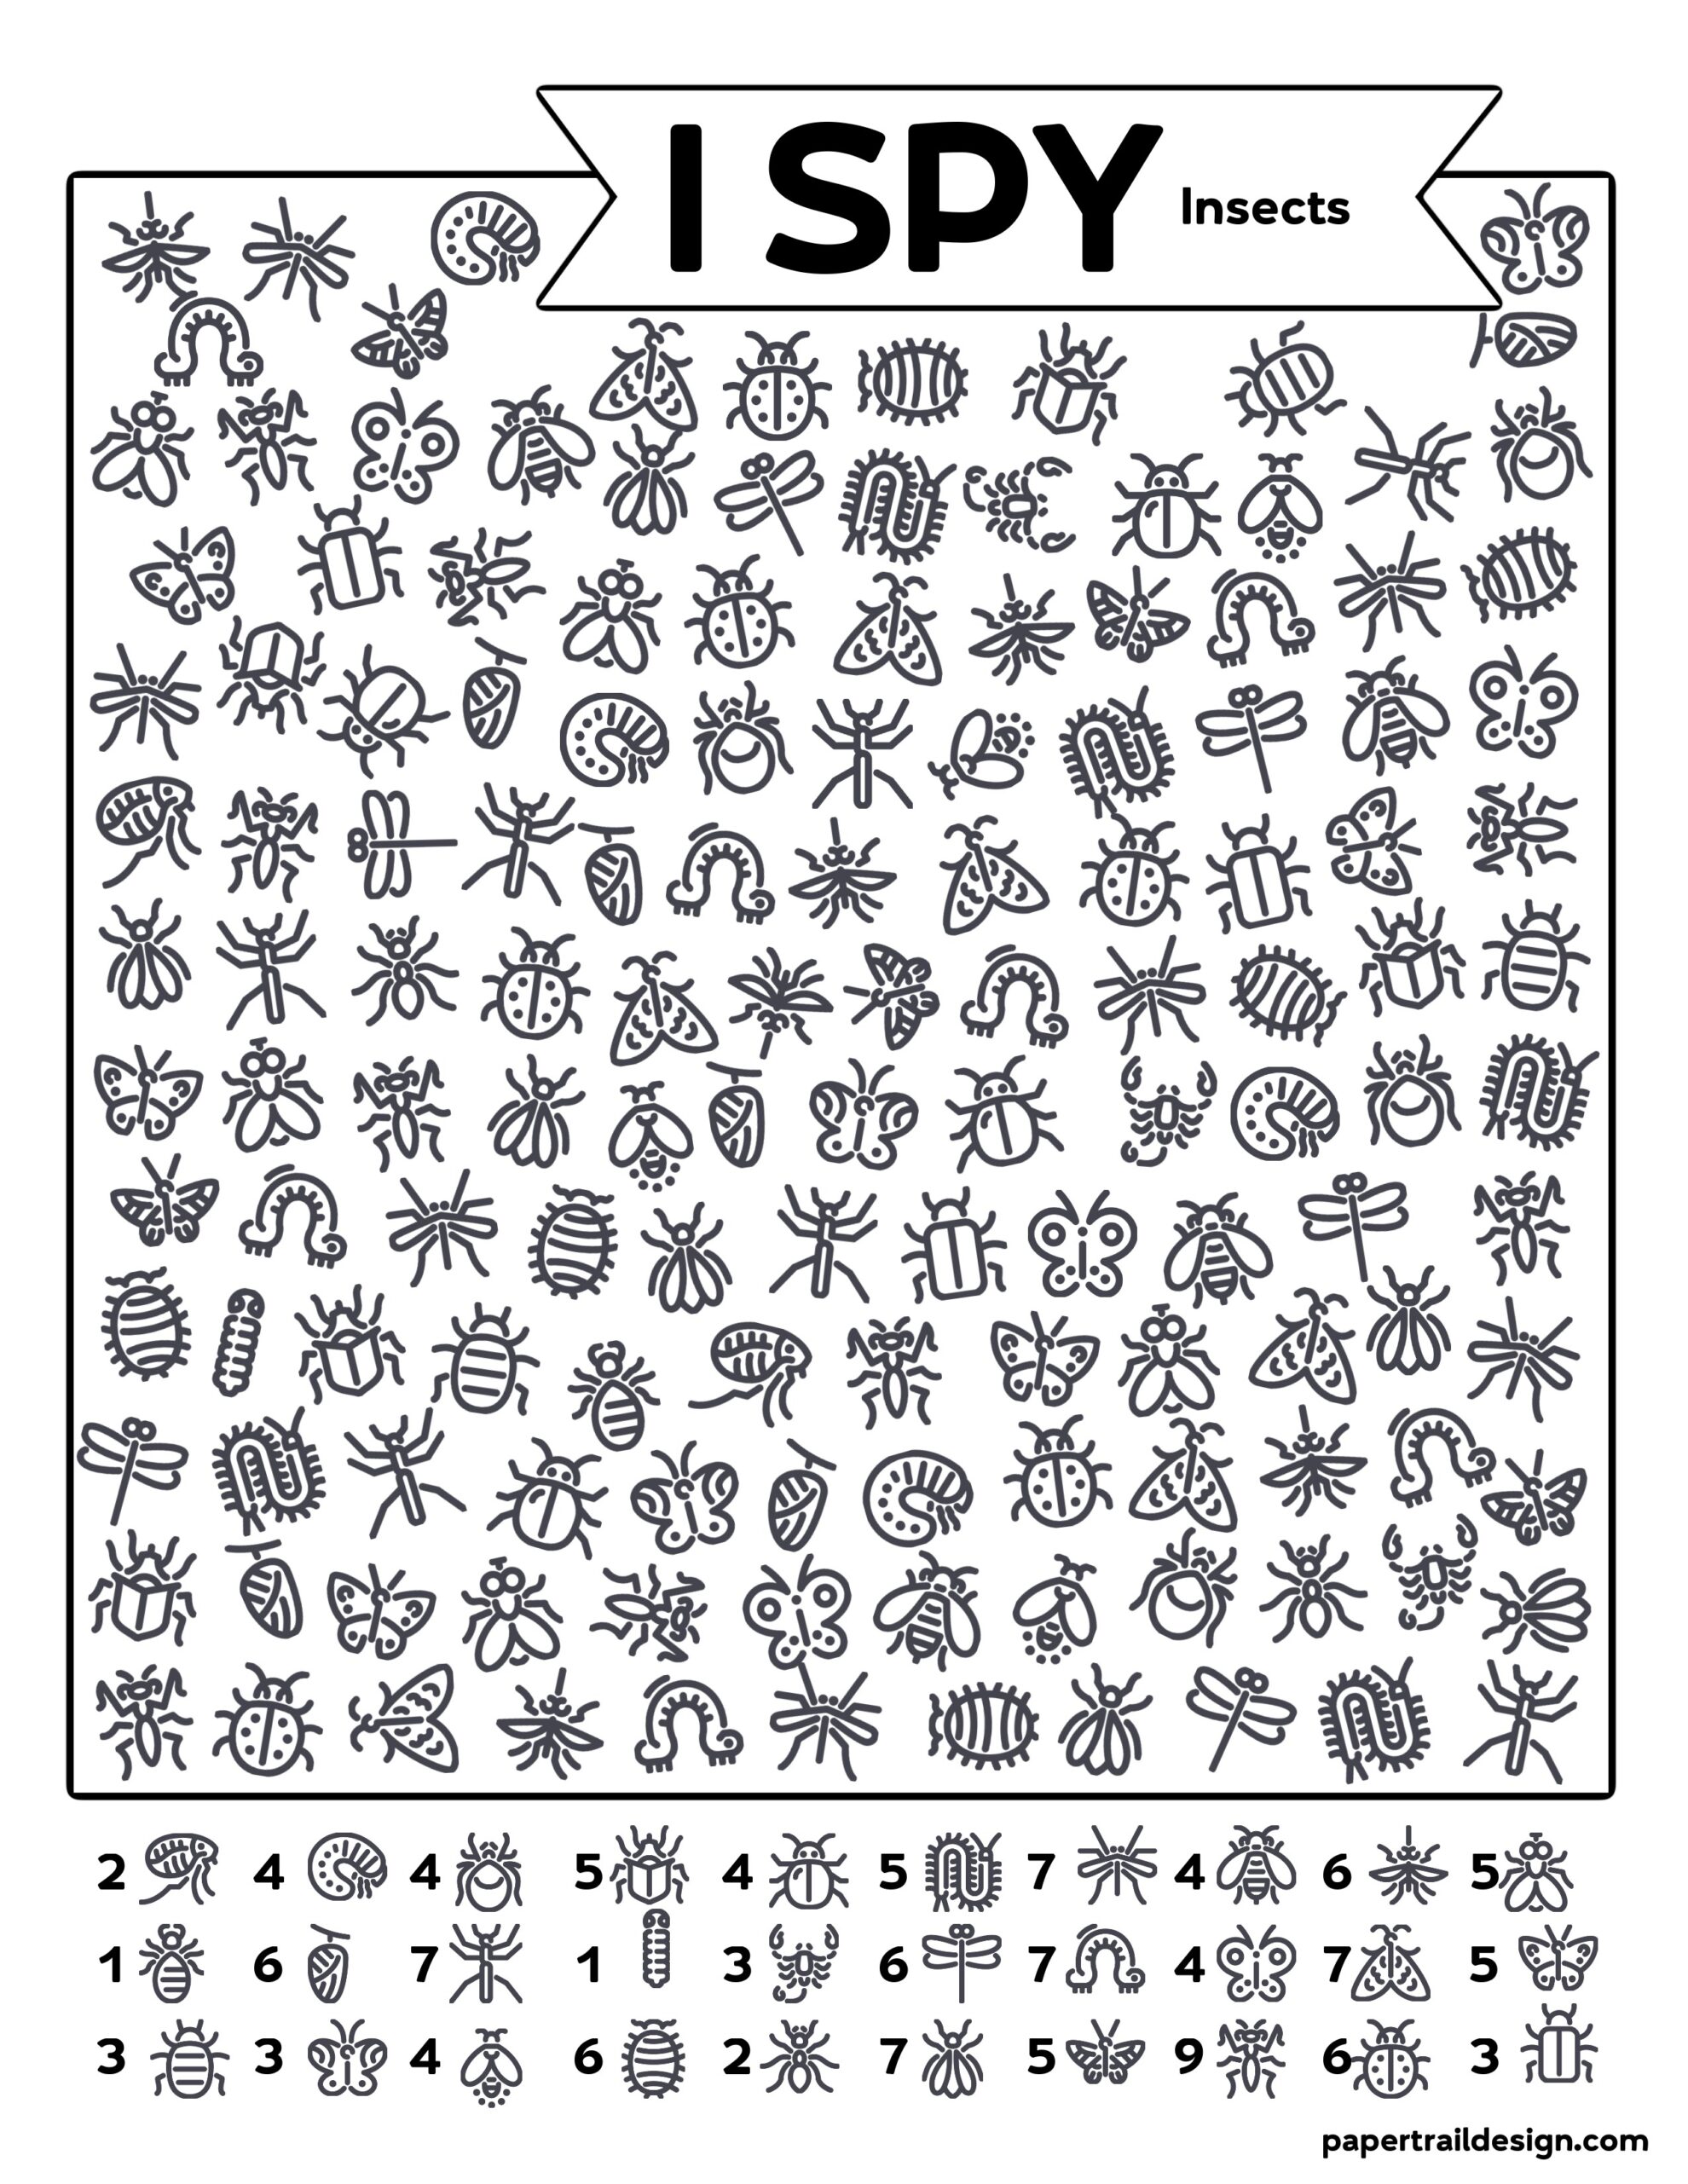 Free Printable I Spy Insects Activity Paper Trail Design